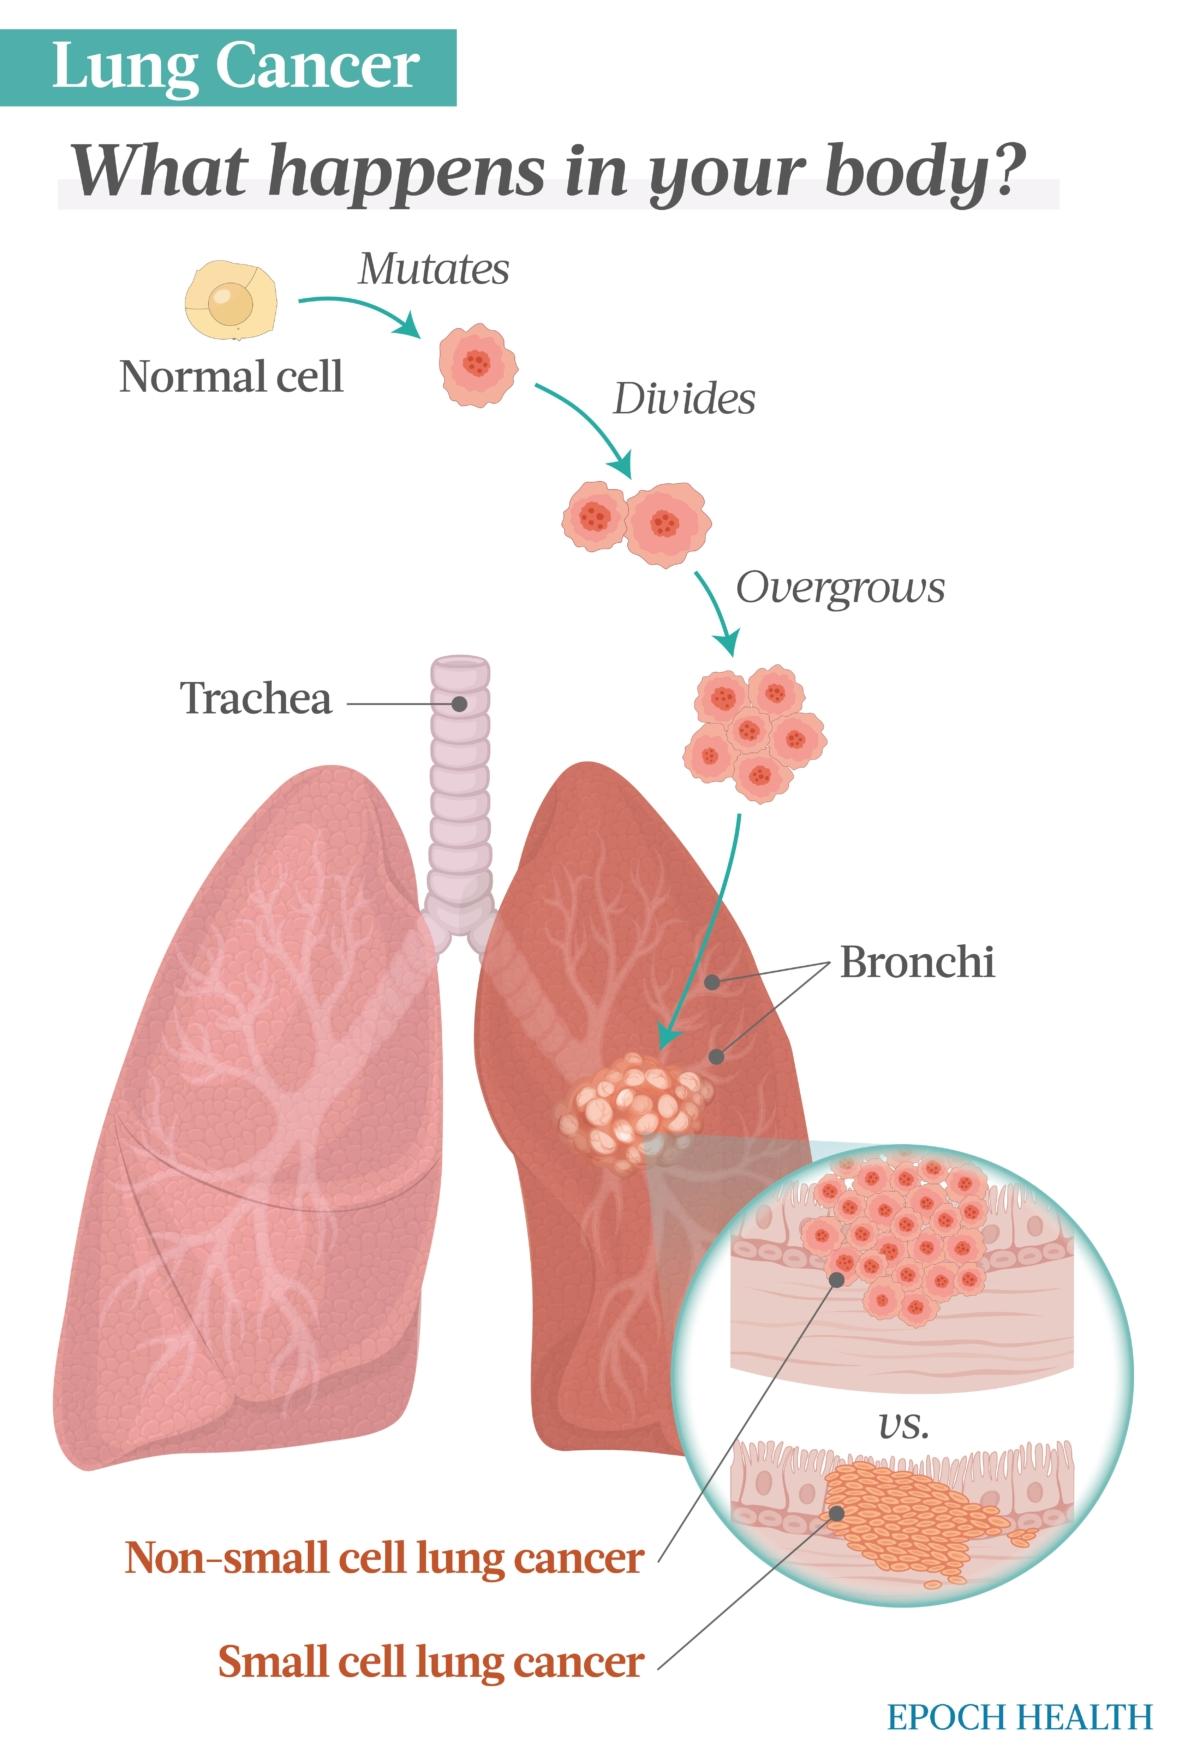 The difference between non-small cell lung cancer and small cell lung cancer has to do with the size of the cells. Additionally, SCLC is more aggressive. (Illustrations from Shutterstock/Designed by The Epoch Times)